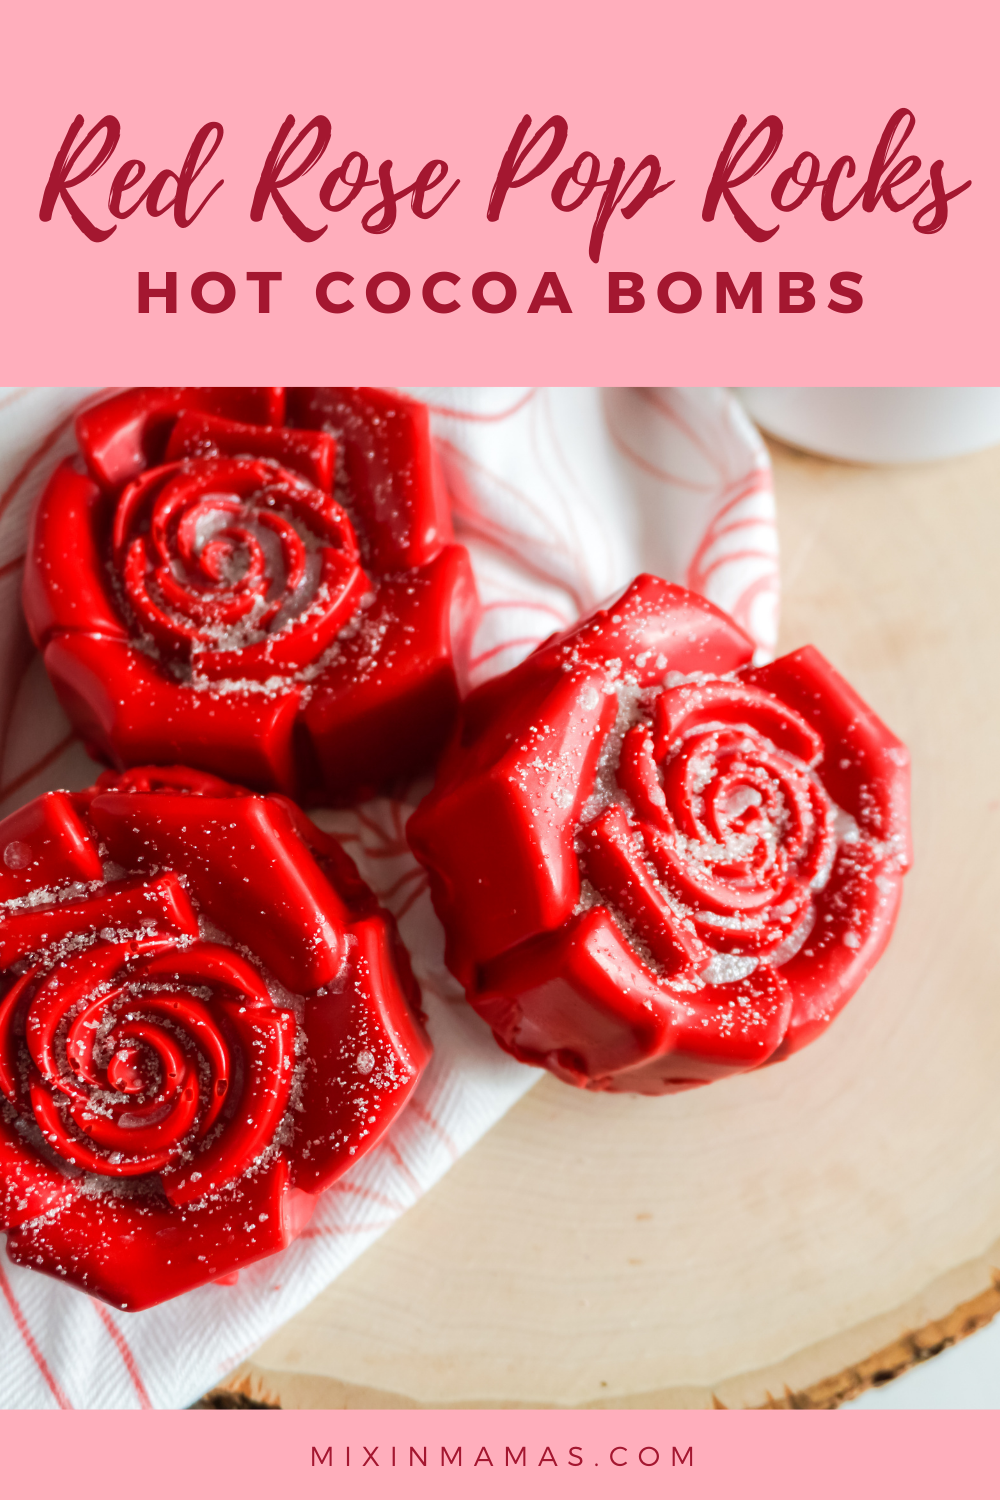 Red Rose Pop Rocks Hot Cocoa Bombs